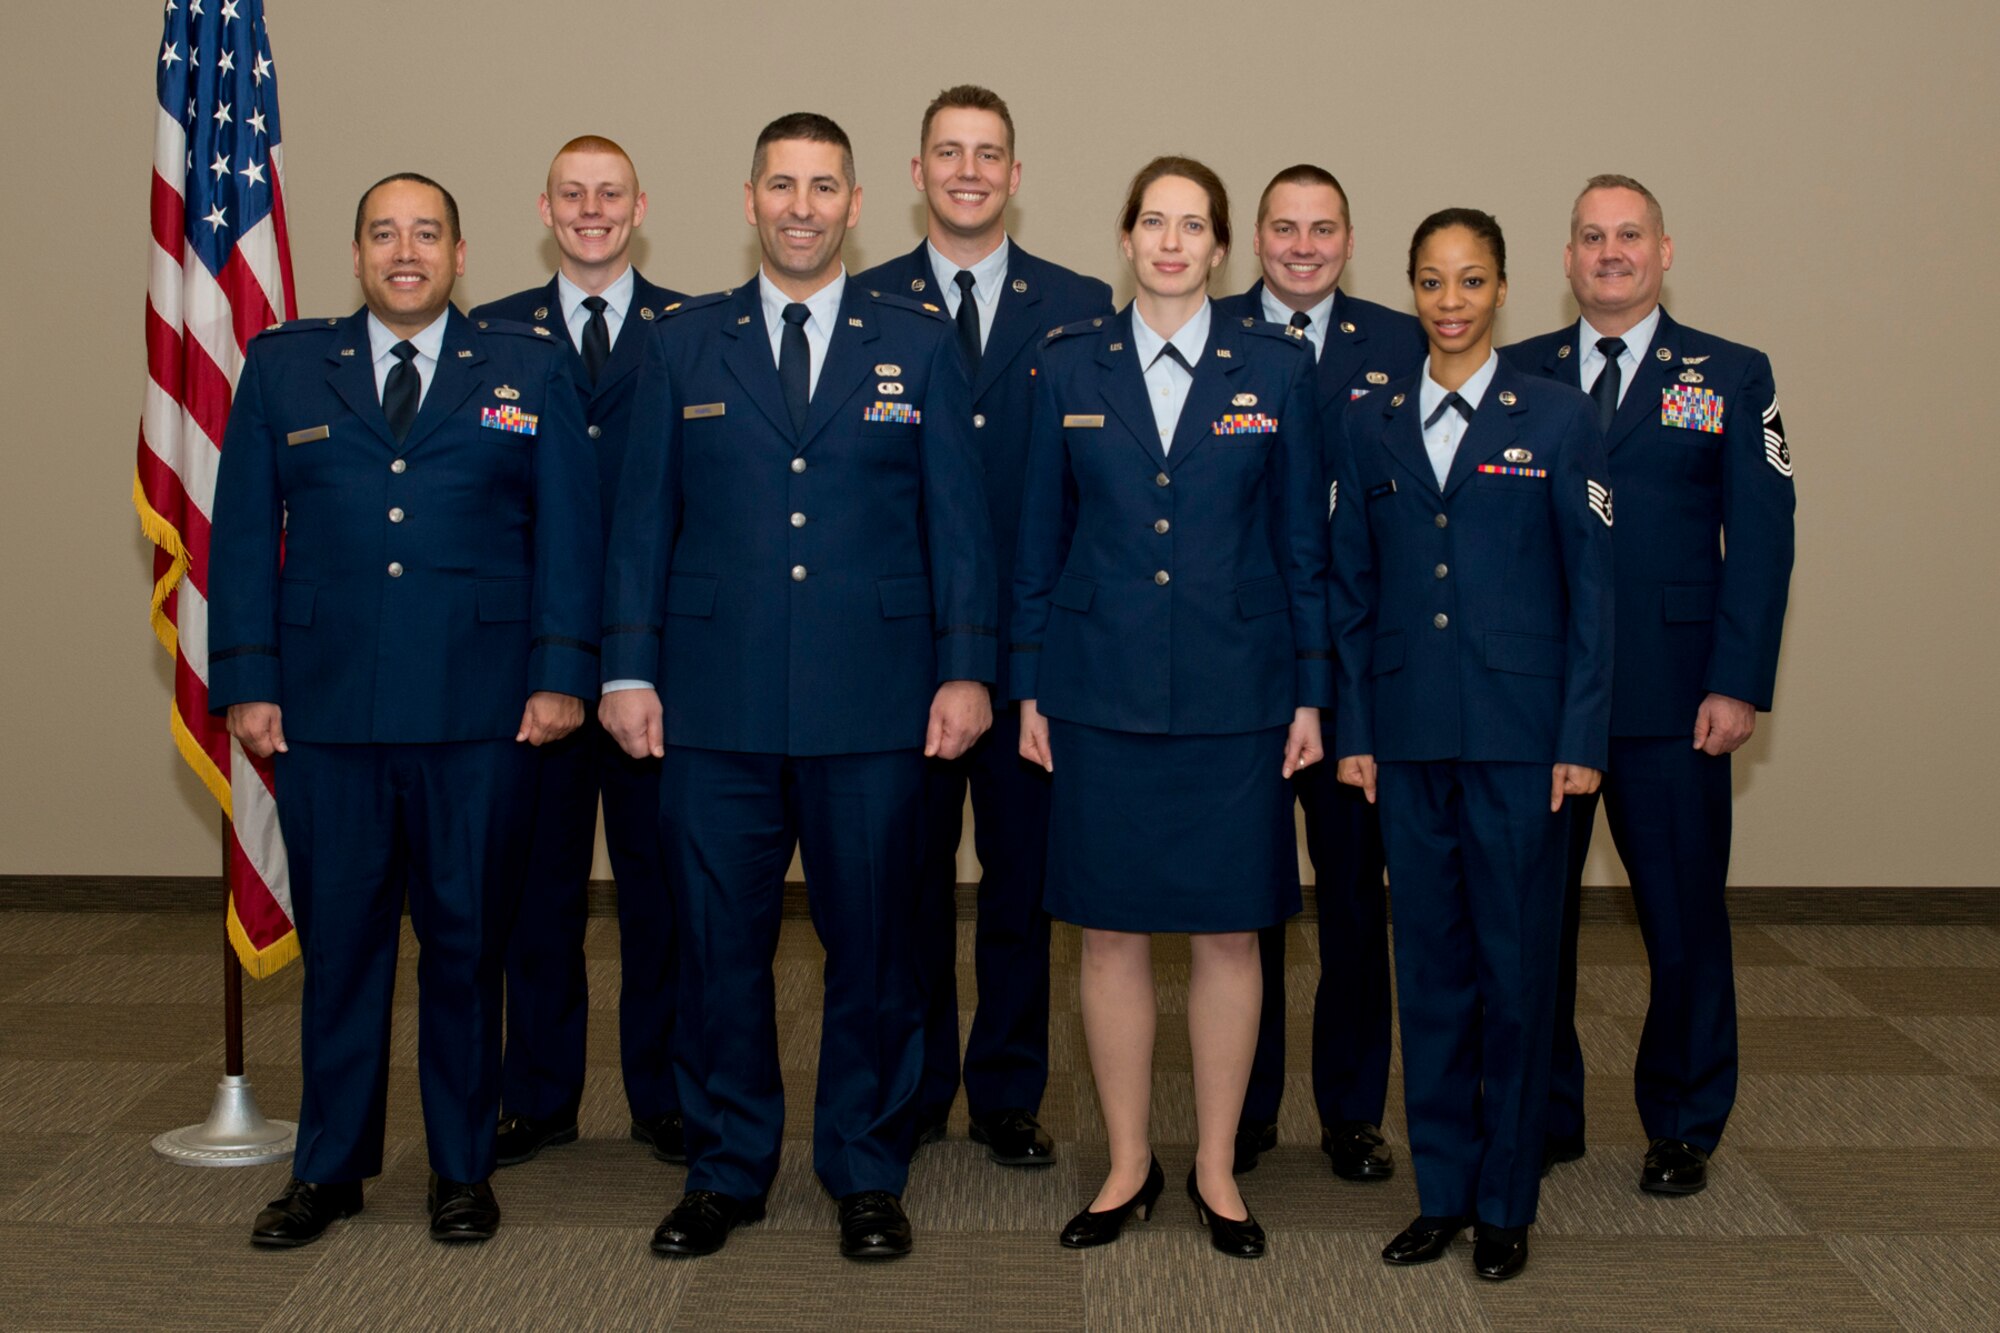 Members of the 913th Intelligence Flight pose for a photo during the first Unit Training Assembly weekend of the year at Little Rock Air Force Base, Ark., Jan. 10, 2016. The unit’s officer in change, U.S. Air Force Reserve Lt. Col. Chris Prott, has a yearly photo taken to record who comes and goes from the unit over time. The yearly photo session is one of the few occasions the entire flight is in the same place at one time. (U.S. Air Force photo by Master Sgt. Jeff Walston/Released)